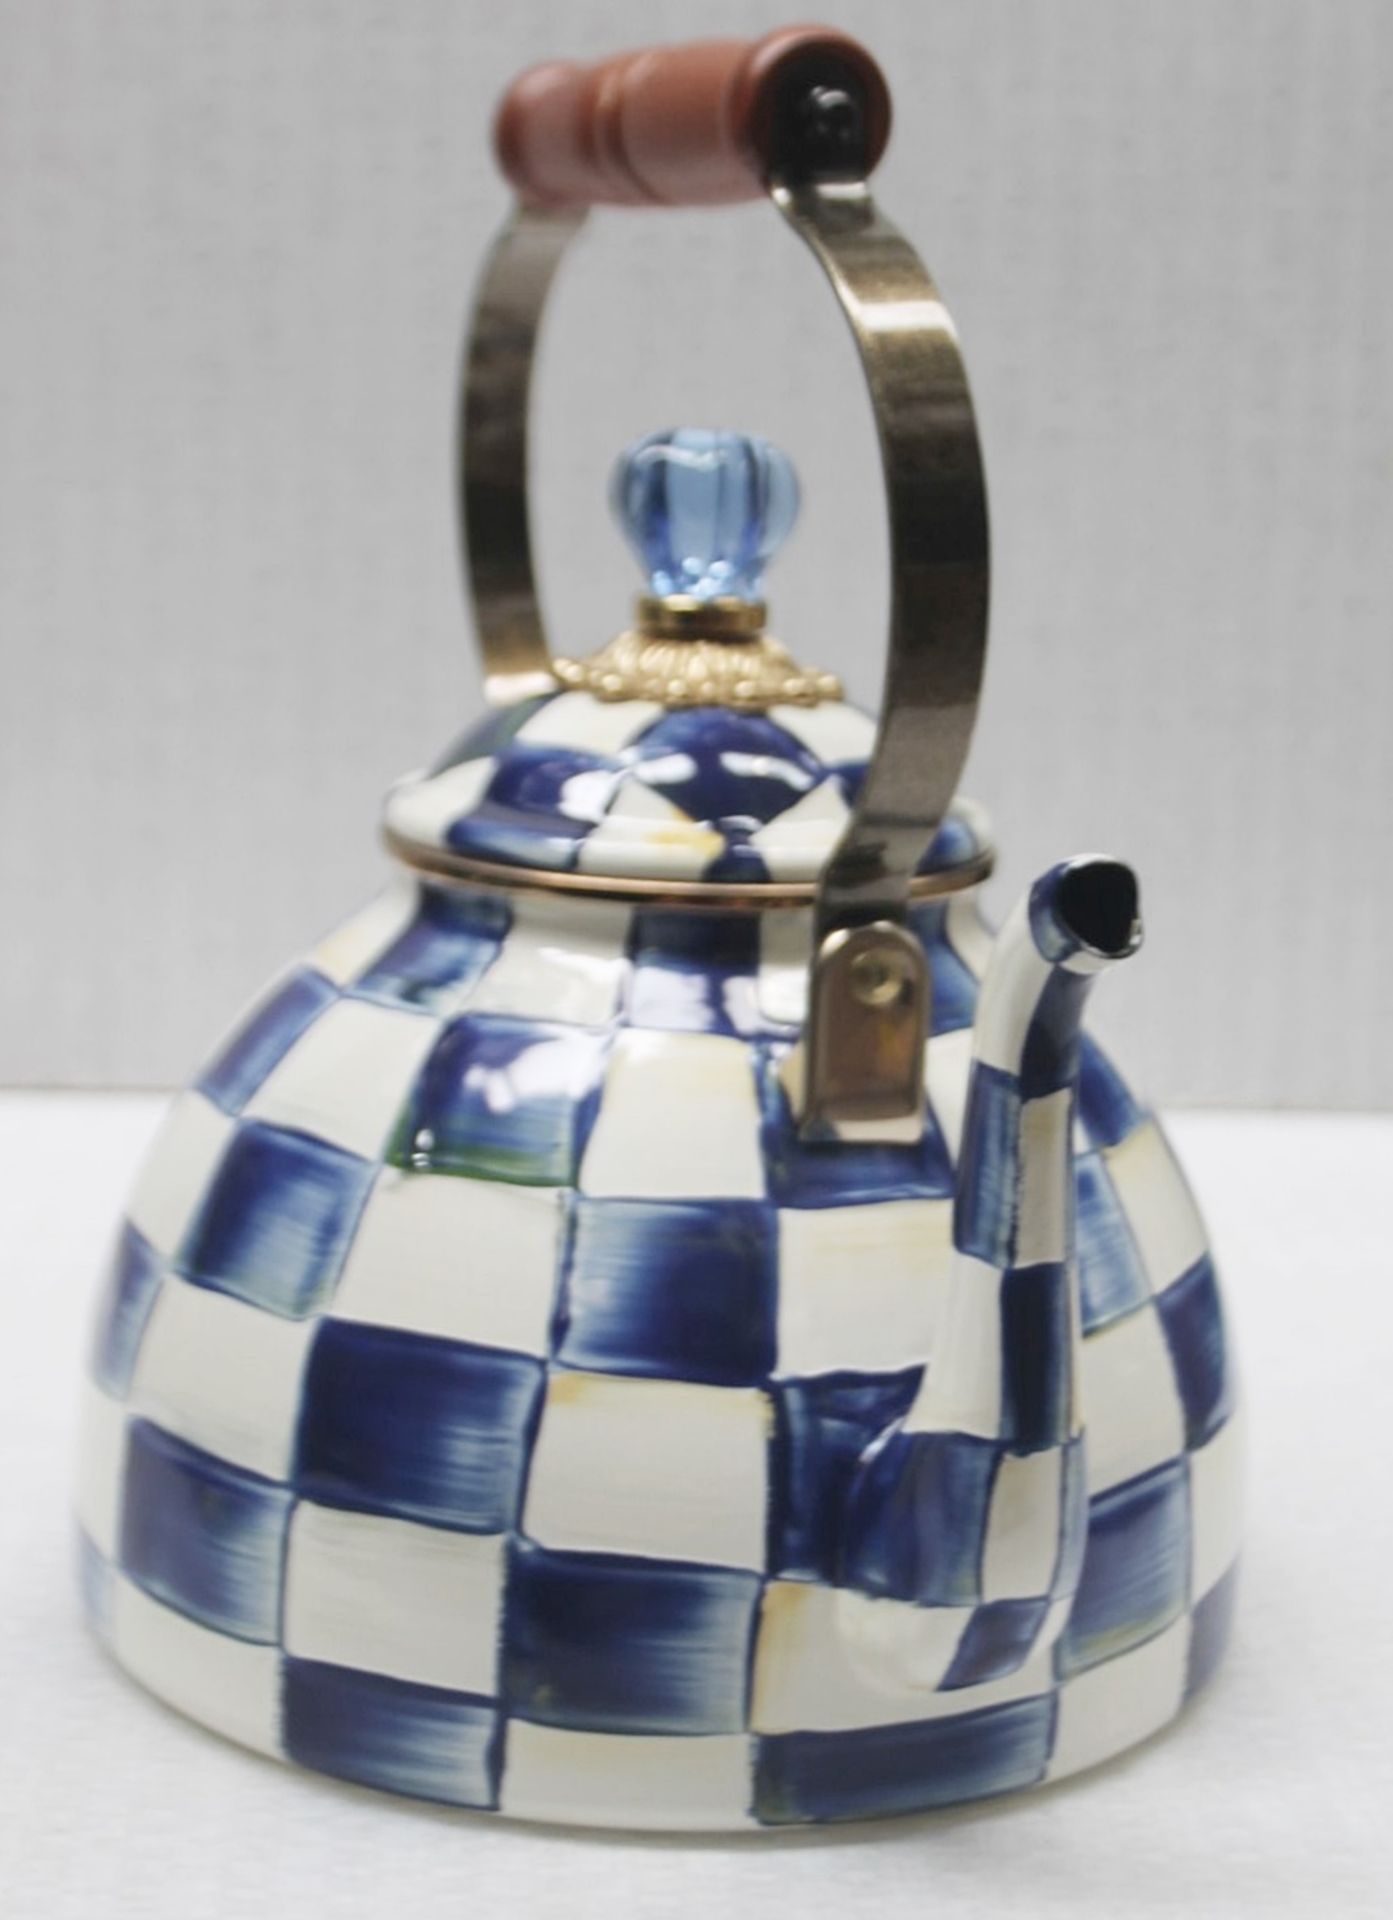 1 x MACKENZIE-CHILDS 'Royal Check' Hand-painted Tea Kettle - Original Price £180.00 - Image 7 of 8